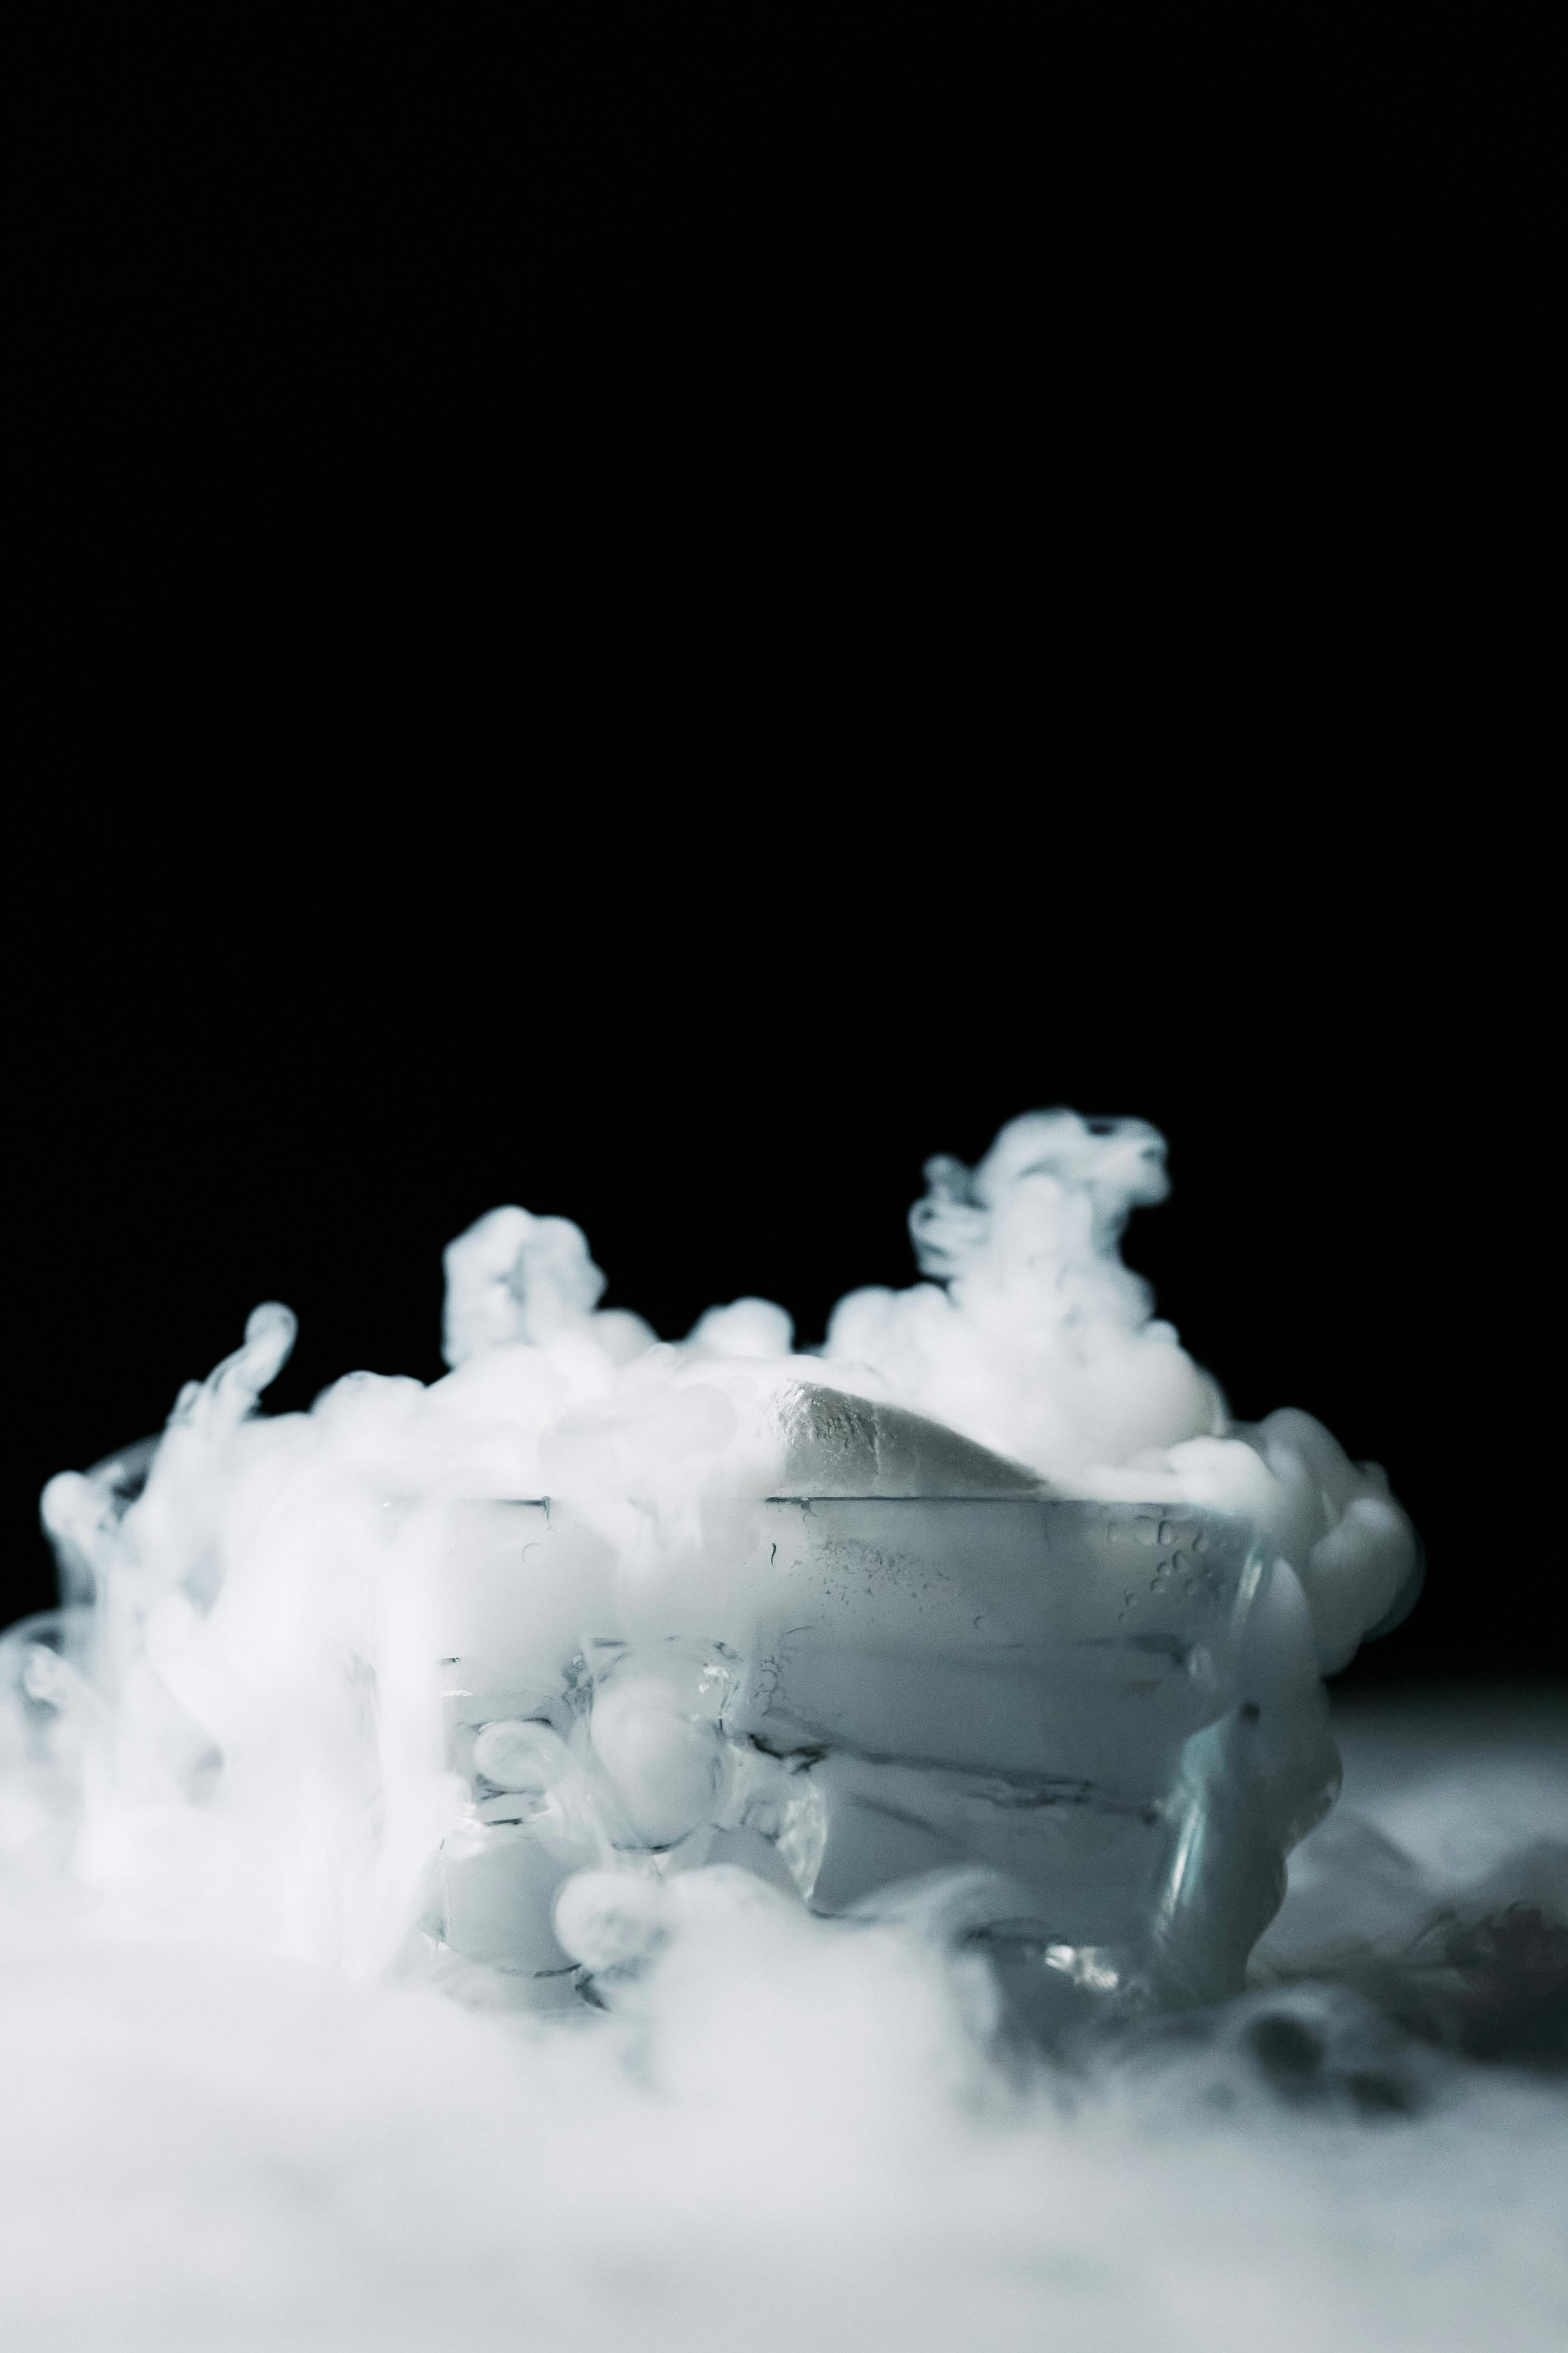 White Smoke in a Glass Container Against Black Background · Free Stock Photo